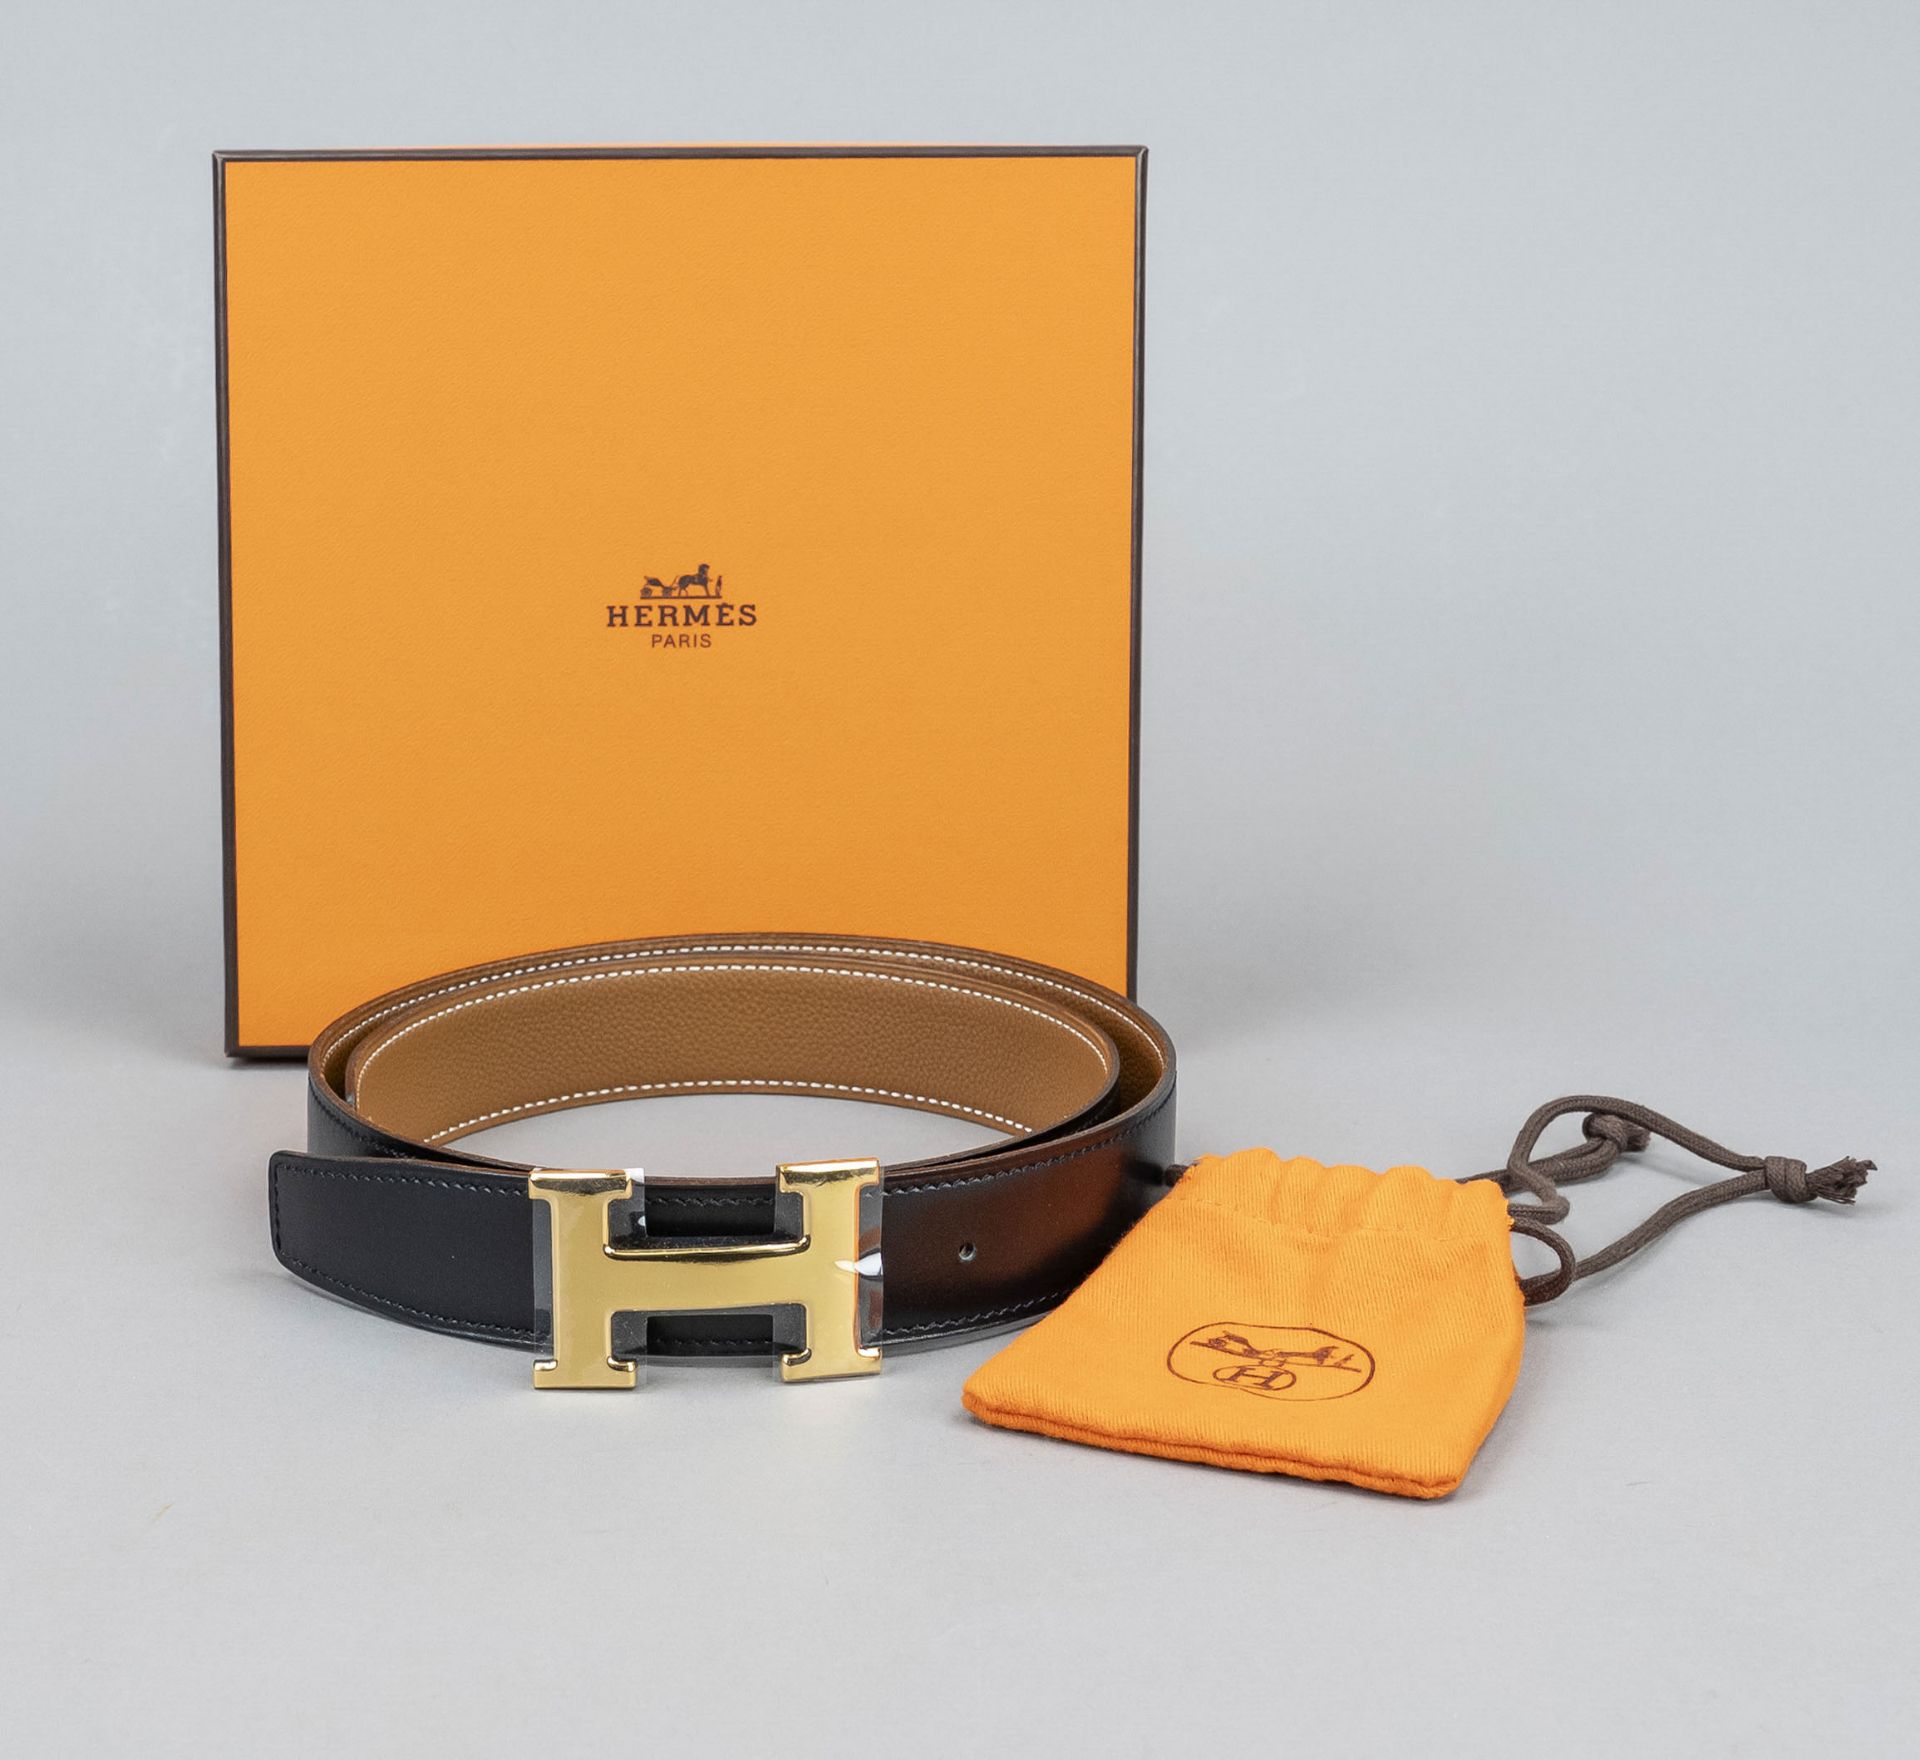 Hermes, reversible belt, soft black and grained cognac-colored leather, partially set off with white